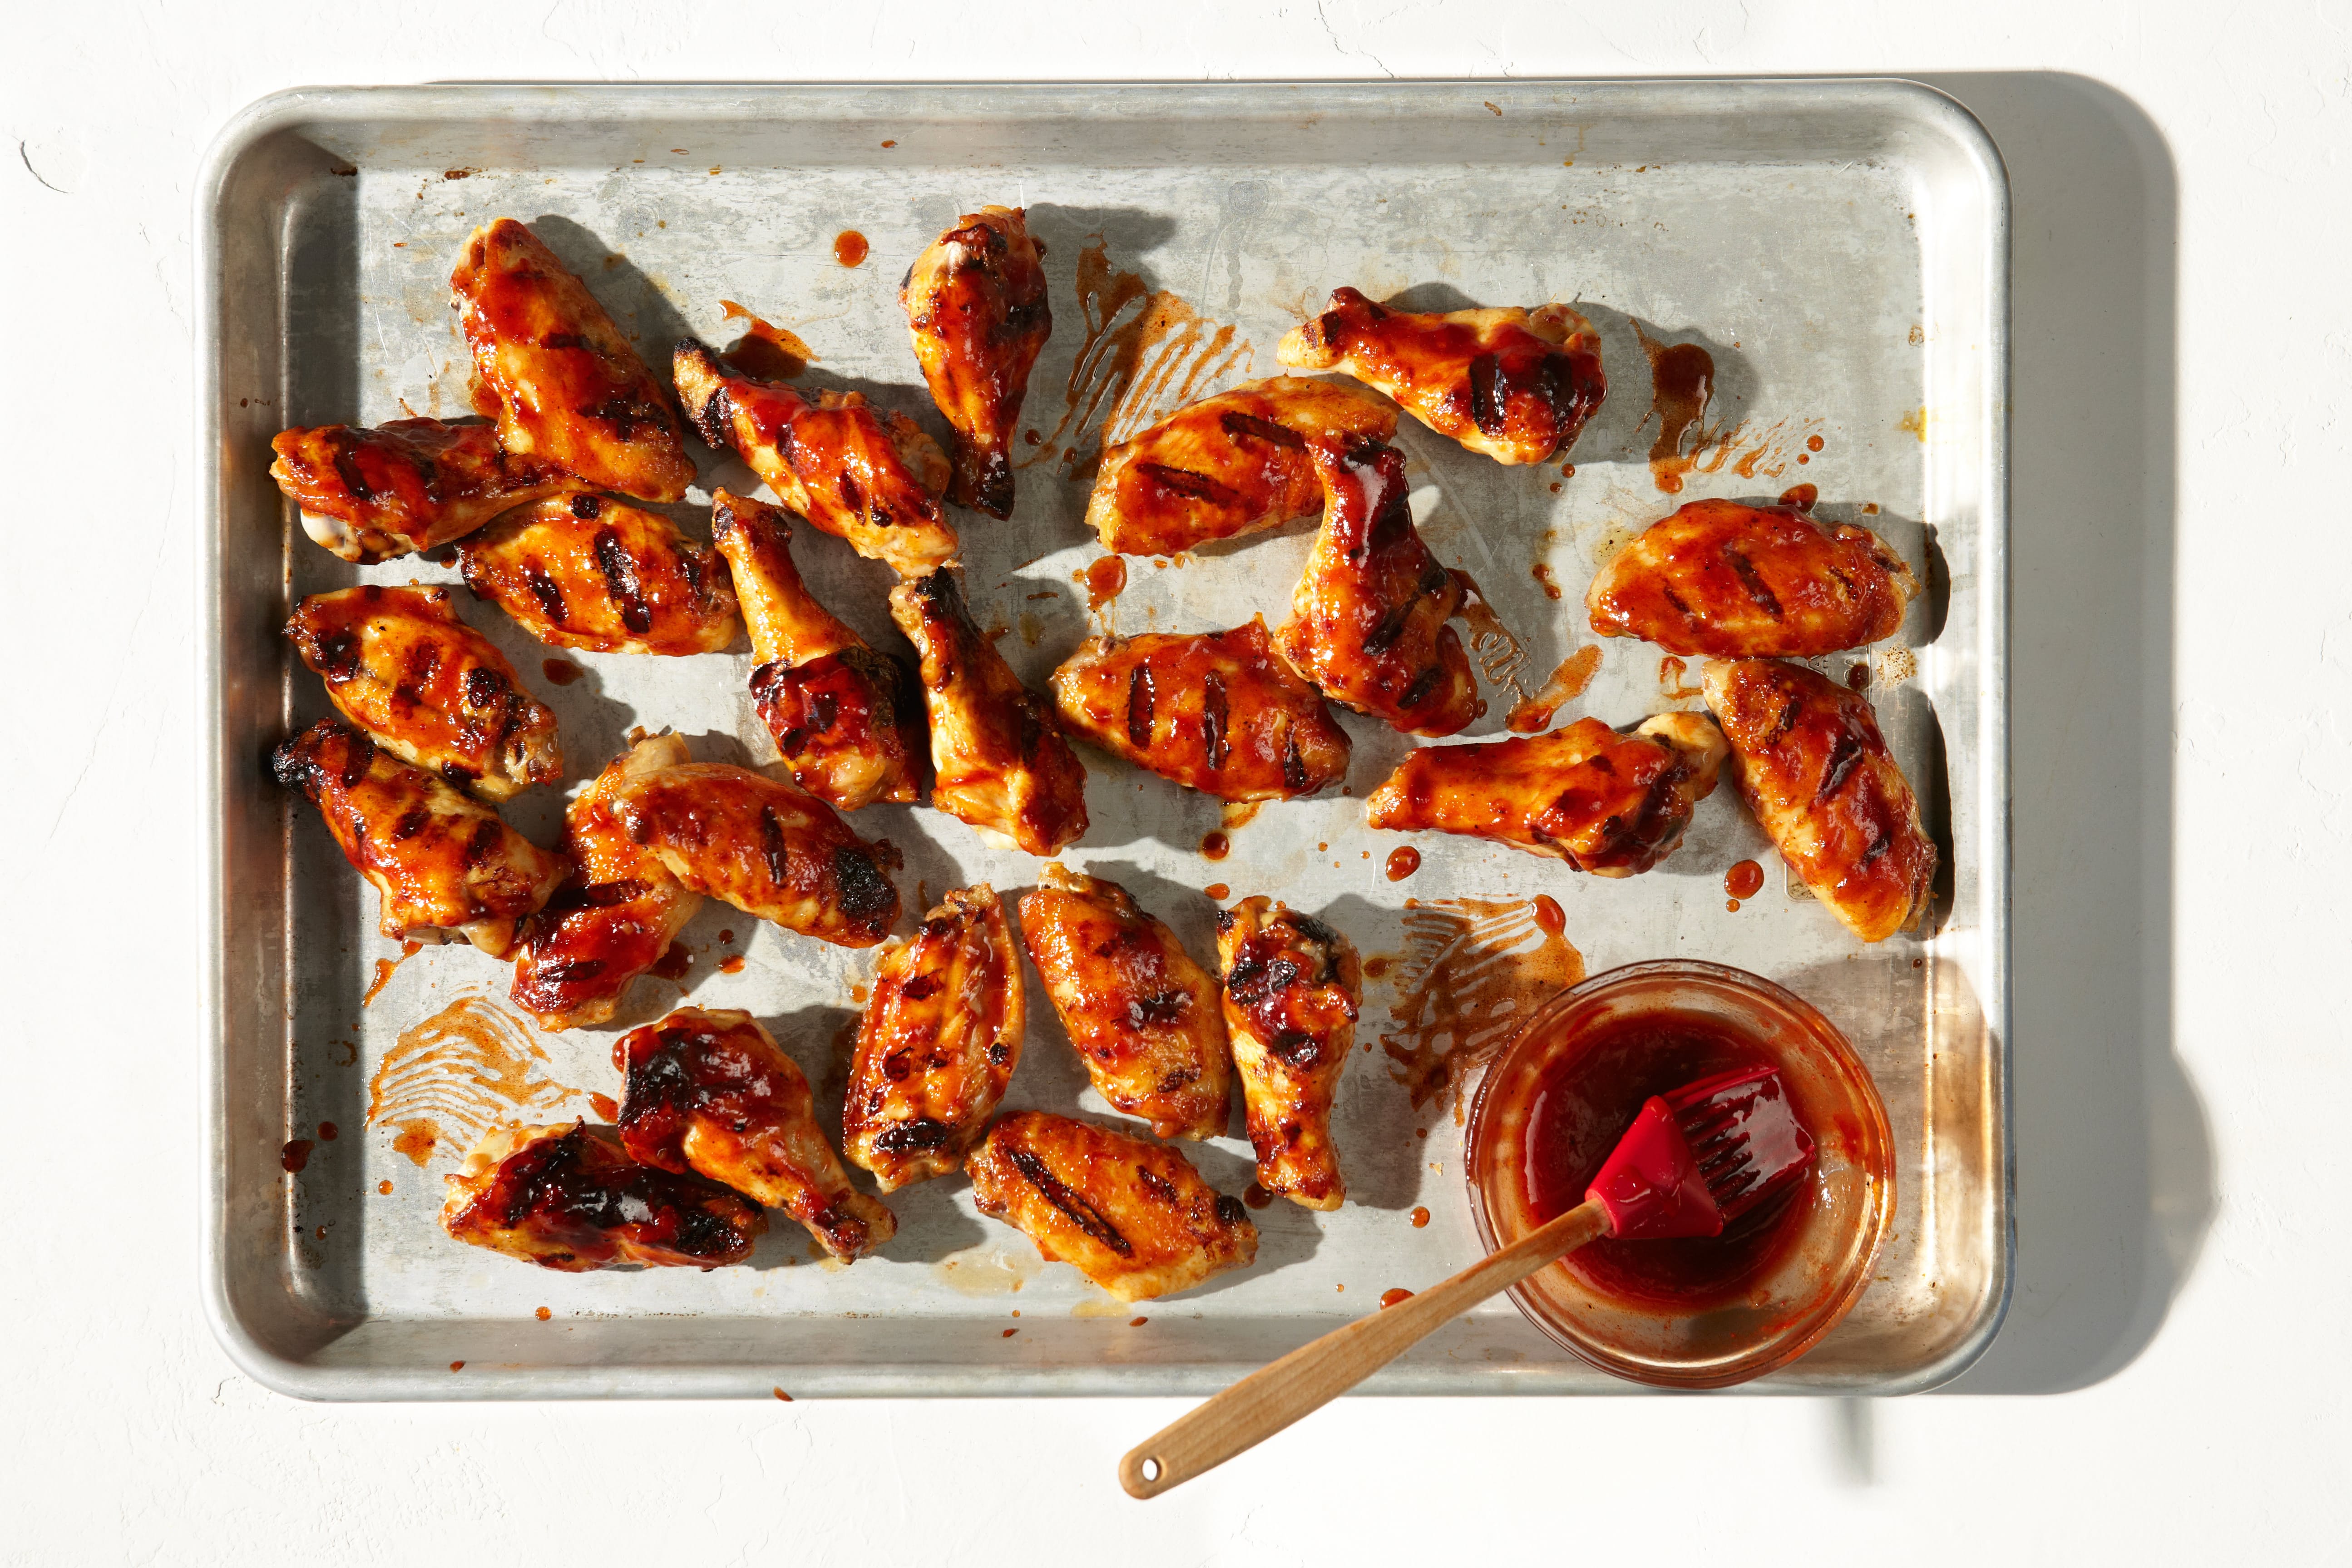 Grilled BBQ Chicken Wings